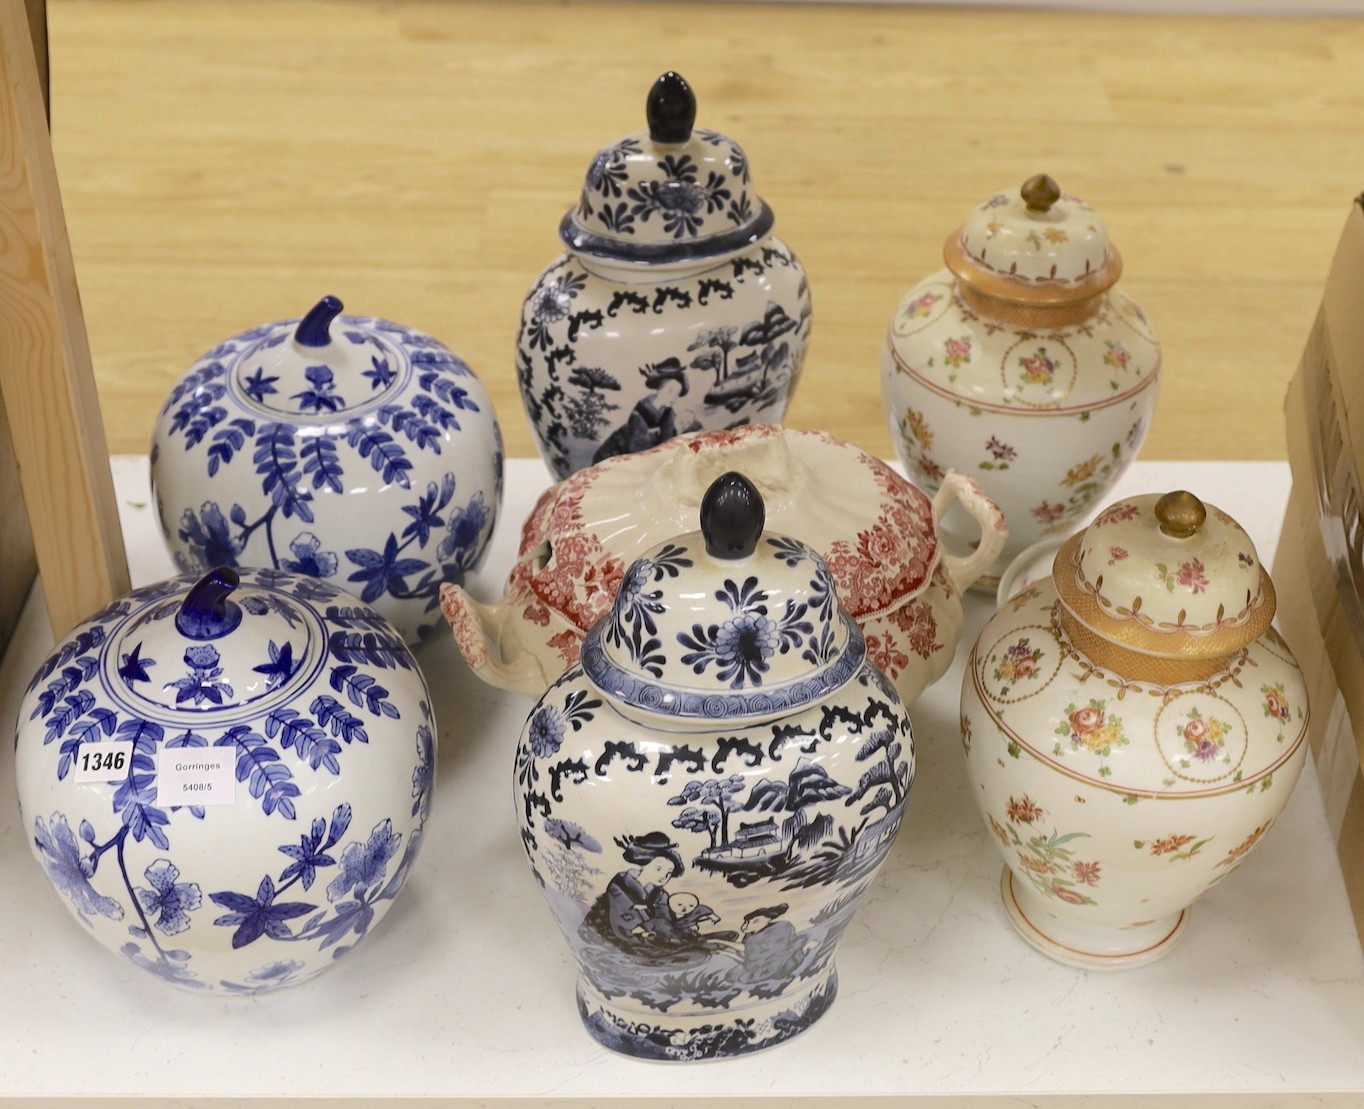 Three pairs of Oriental style ceramics vases and two lidded tureens- lidded blue and white vases 40 cms high.